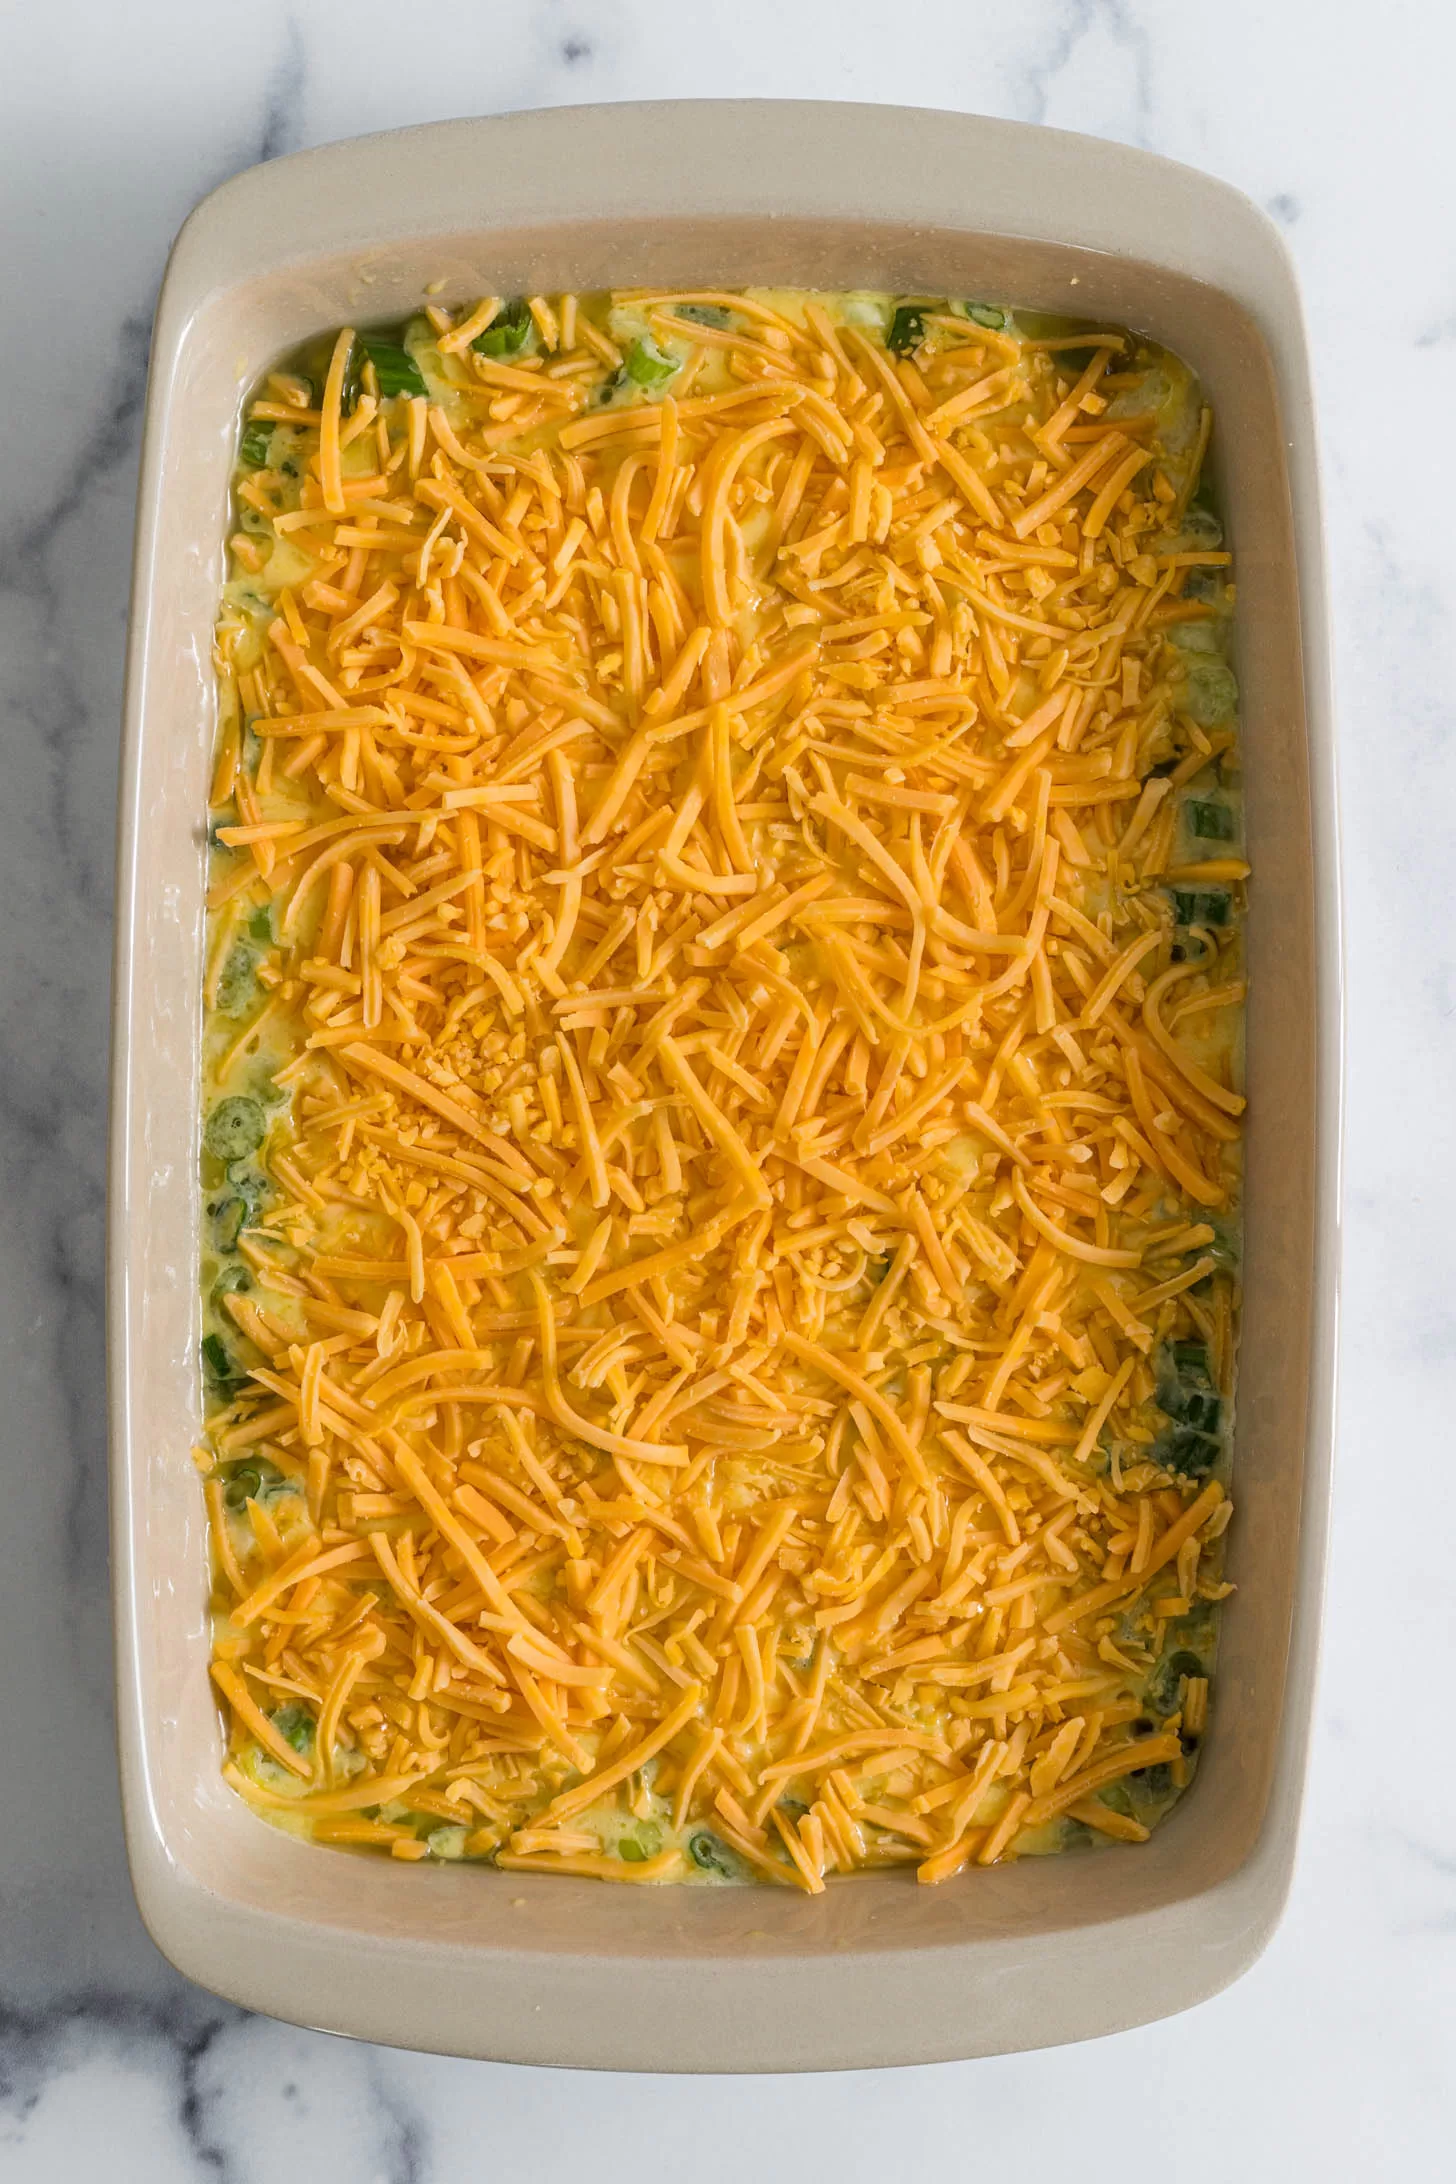 Egg mixture poured into baking dish with sprinkled cheese on top.